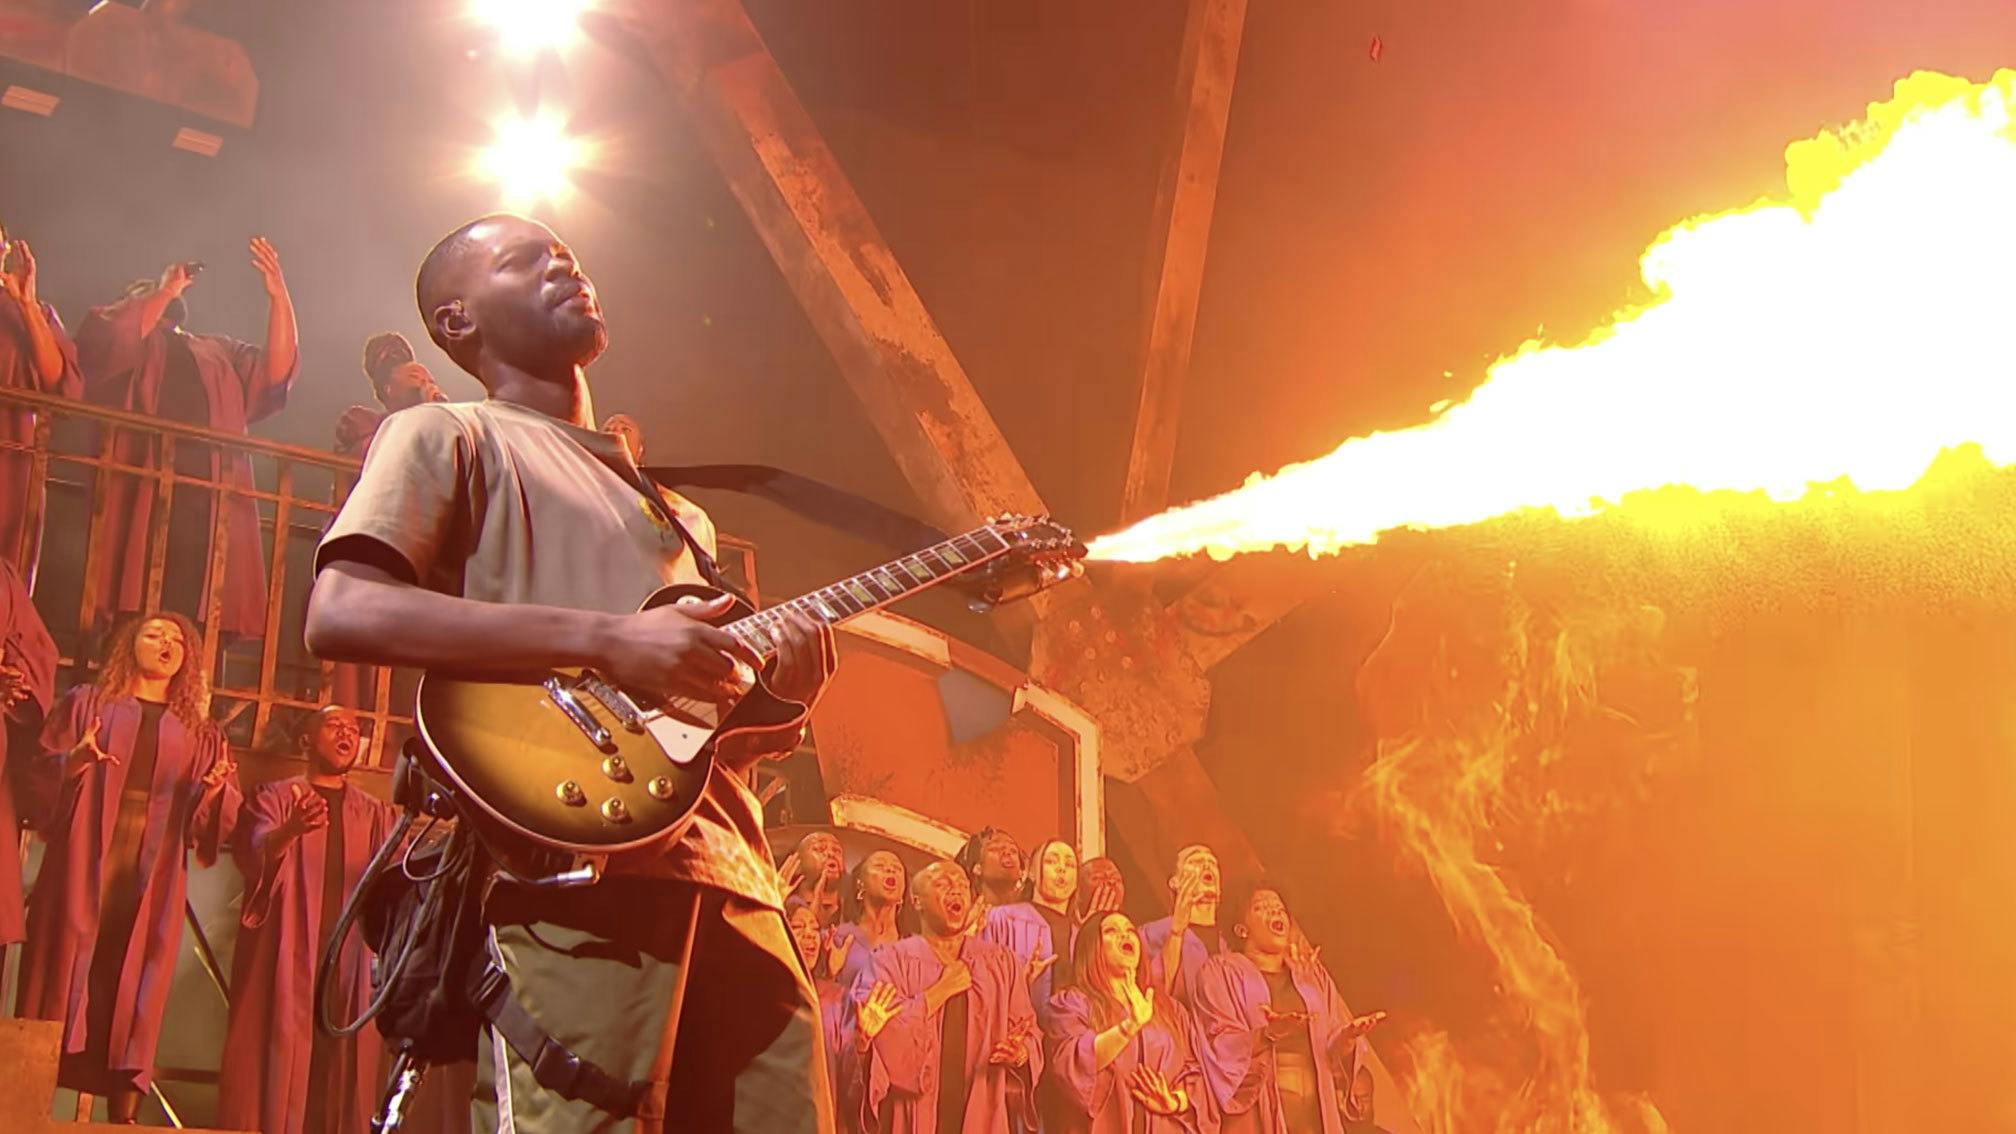 Watch rapper Dave shred on a flamethrower guitar for BRITs 2022 closing performance